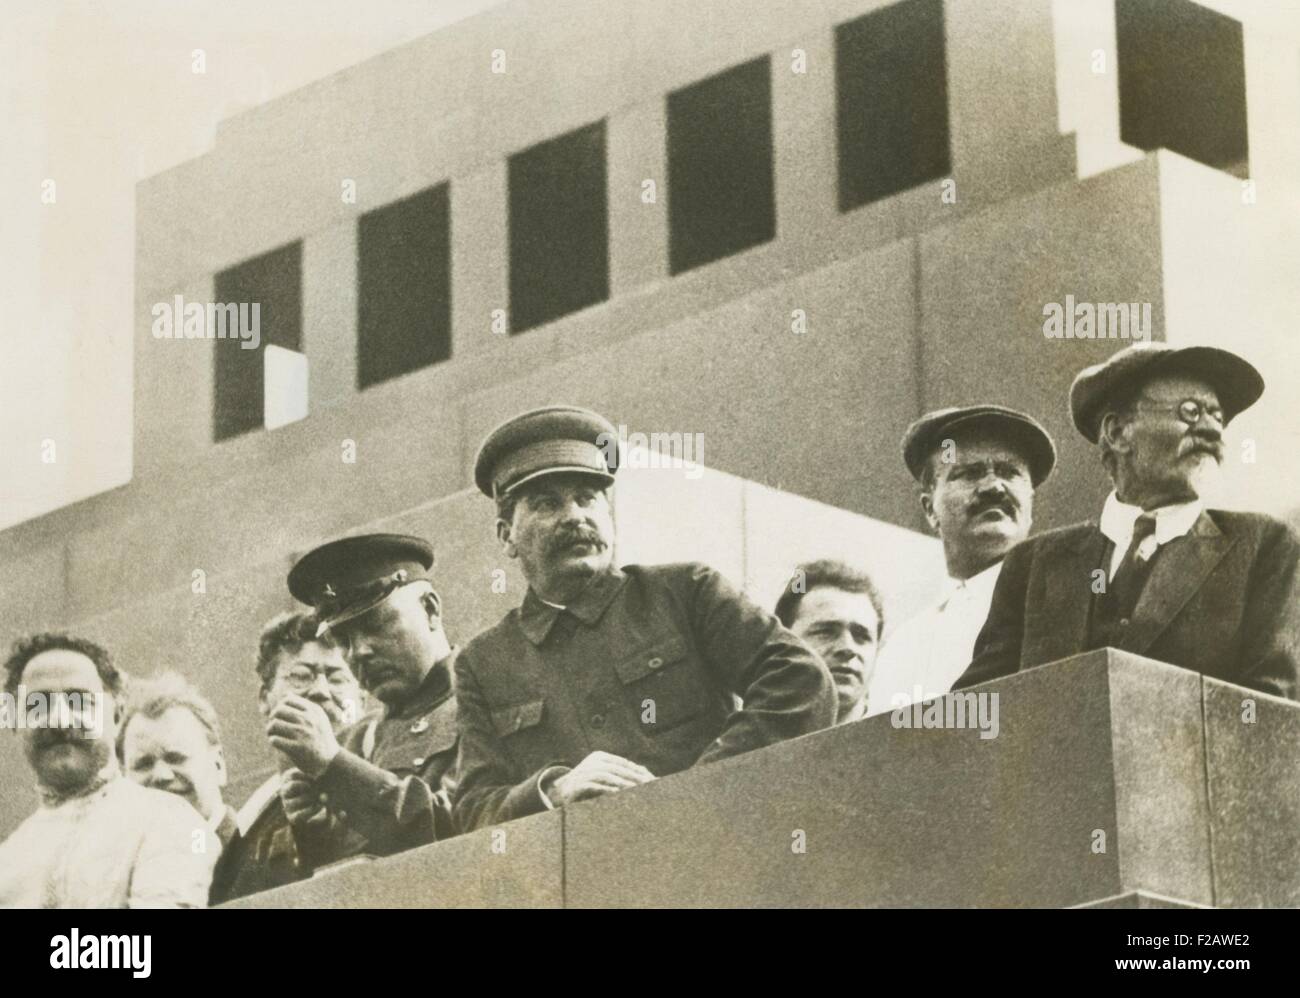 Soviet leaders witnessing the Great Sports Parade of over 100,000 in Red Square, Moscow. June 29, 1933. L-R: Ordzhonikidze, People's Commissar for Heavy Industries; Jaroslawsky (third from Left) member of the Central Control Commission; Voroshiloc, People's Commissar for War and Navy; Stalin, General Secretary of Central Committee of the Communist Party; Molotov (in white jacket), Chairman of the Council of People's Commissars, and Kalinin, Chairman of the Central Executive Committee of the Soviet Union. (CSU 2015 11 1372) Stock Photo